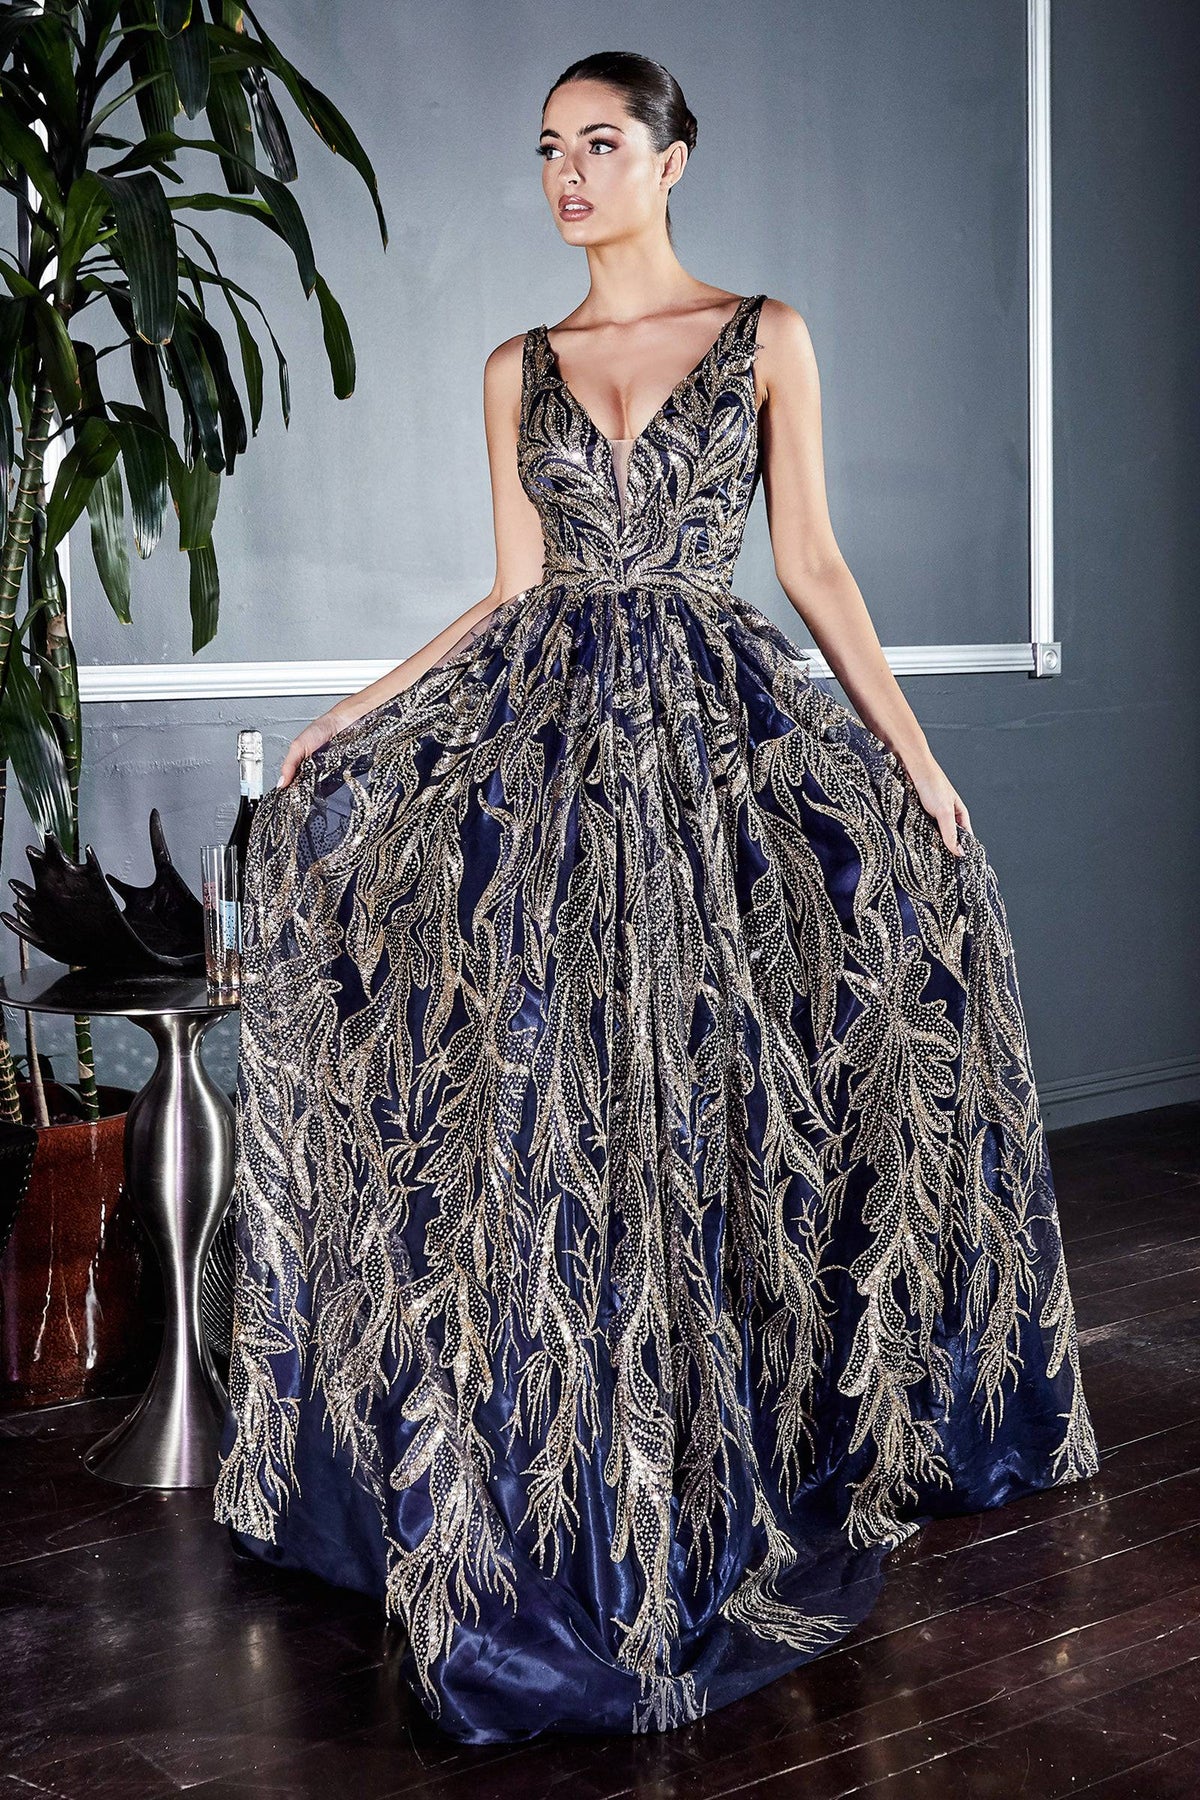 Opulent Ball Gown with Embroidered Detailing and Layered Satin Skirt #CDJ812 - NORMA REED